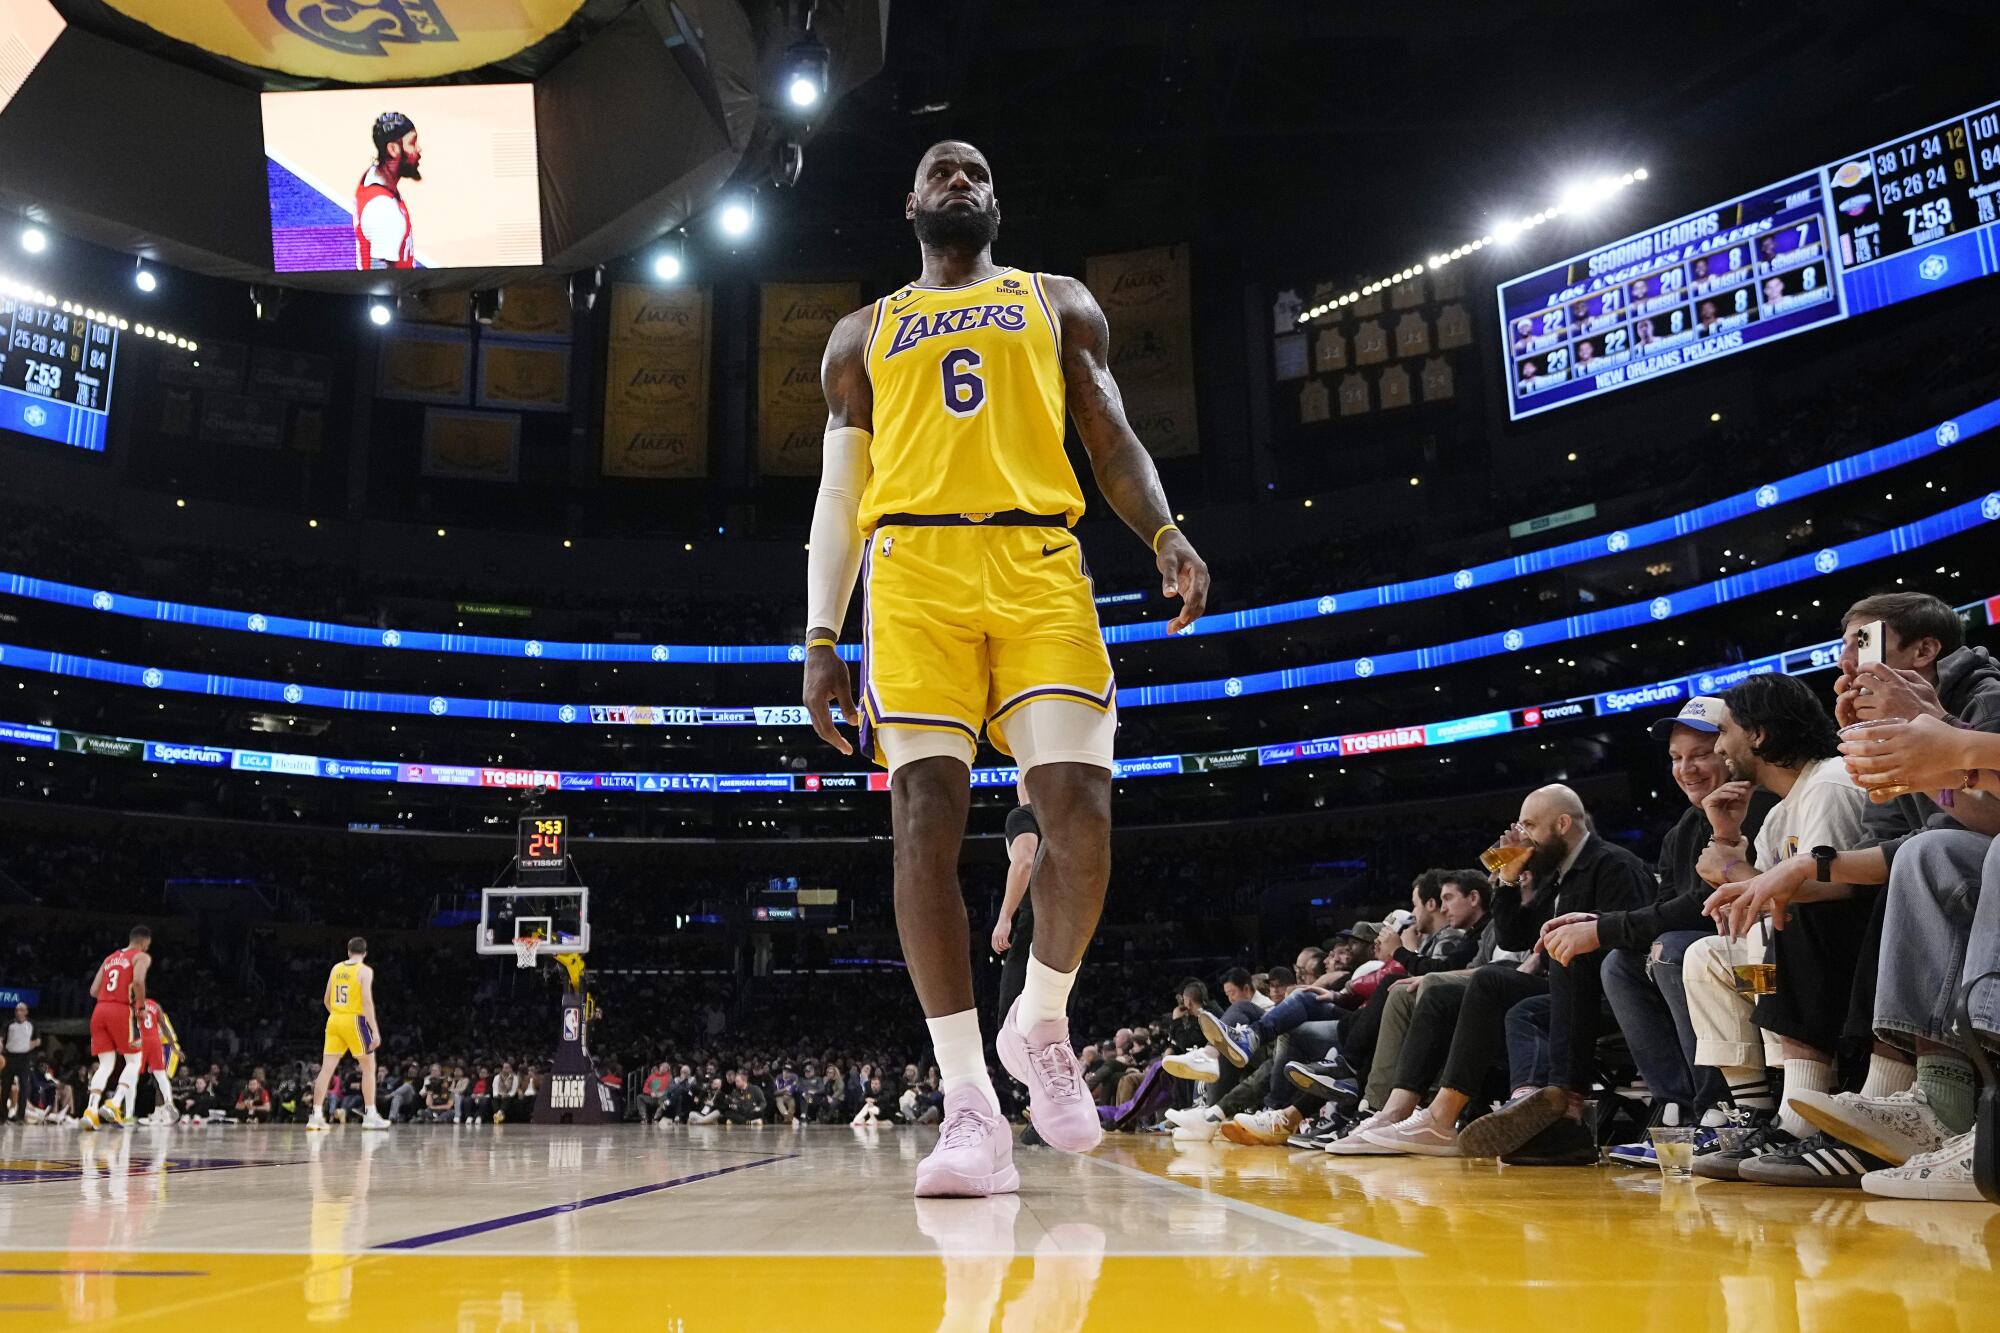 Lakers forward LeBron James walks to the corner of the court.